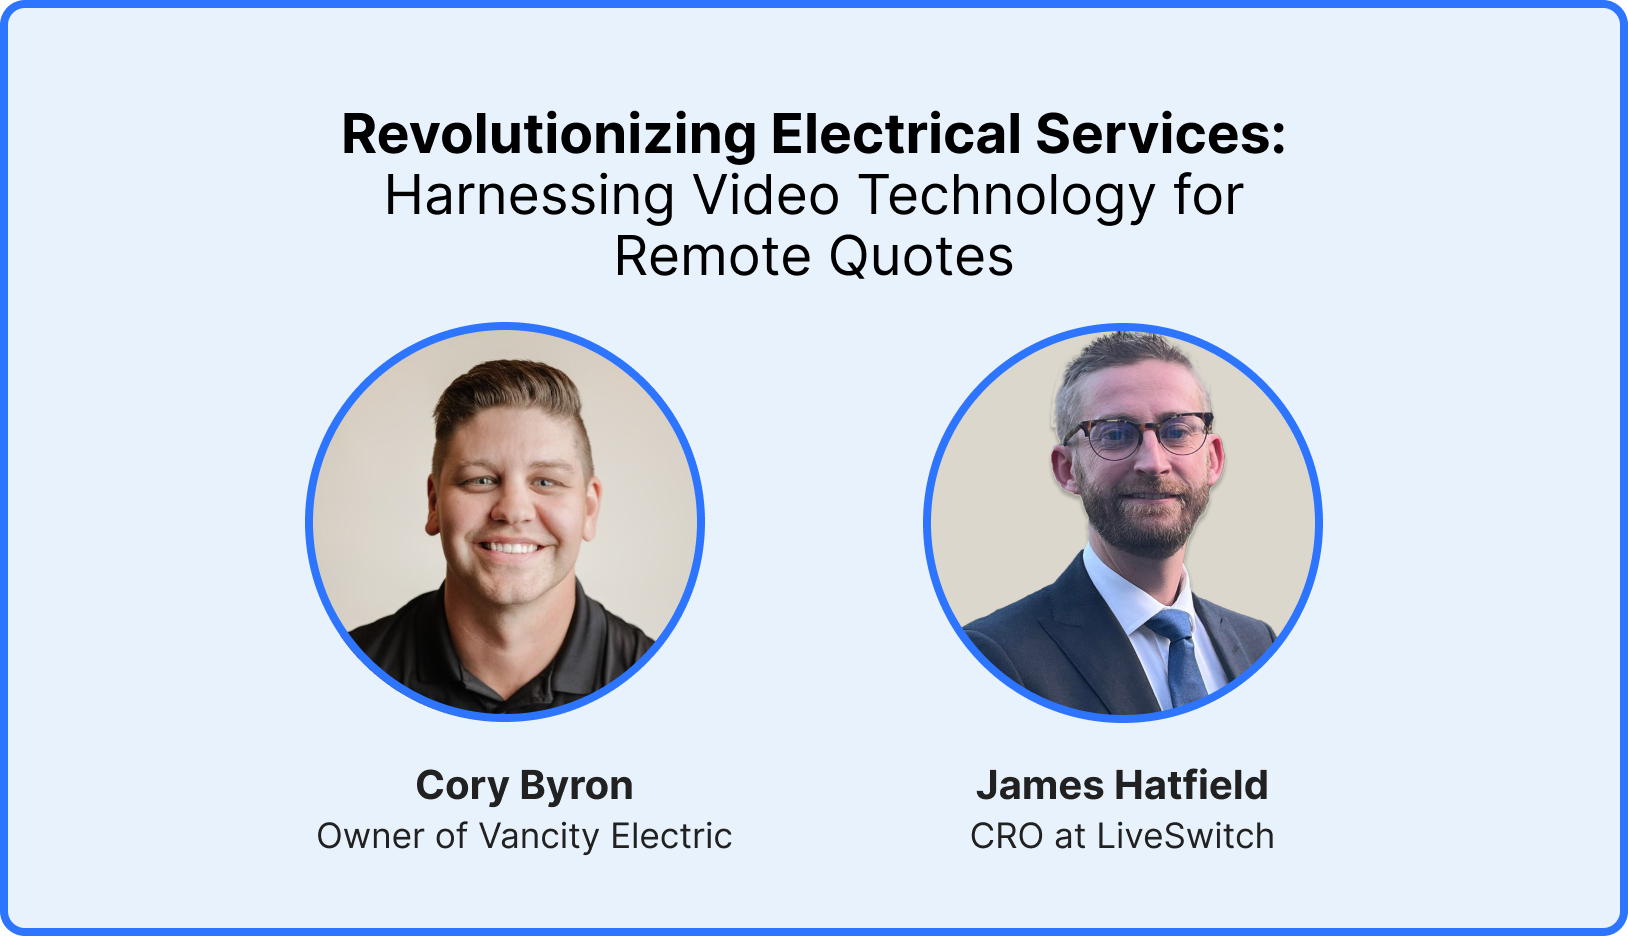 Webinar: Revolutionizing Electrical Services: Harnessing Video Technology for Remote Quotes